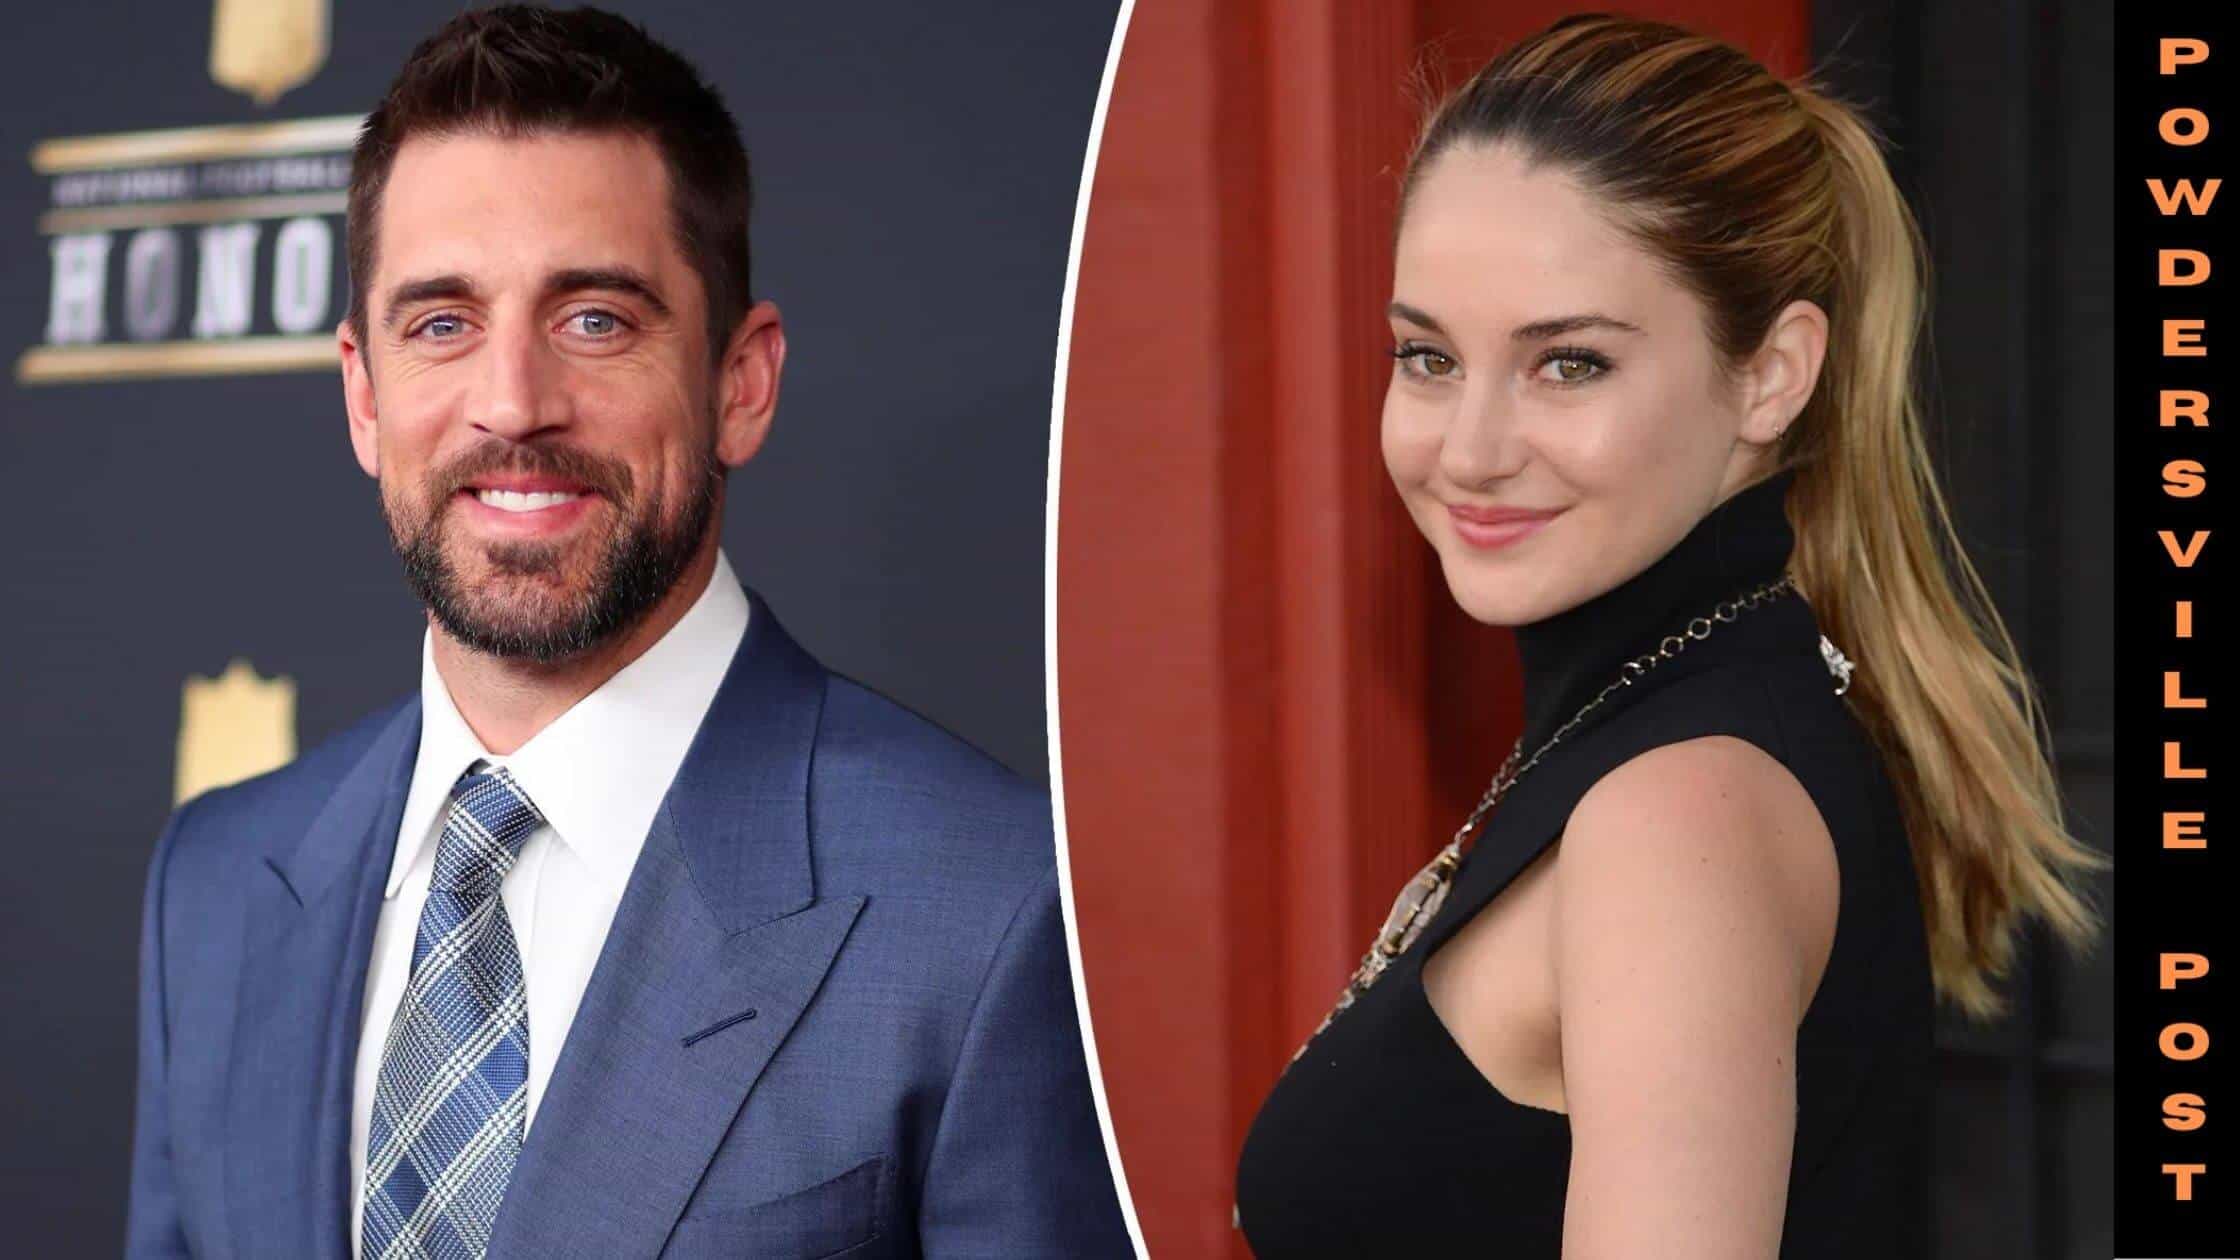 Aaron Rodgers And Shailene Woodley Were Spotted Together In Florida Days After Breakup Reports